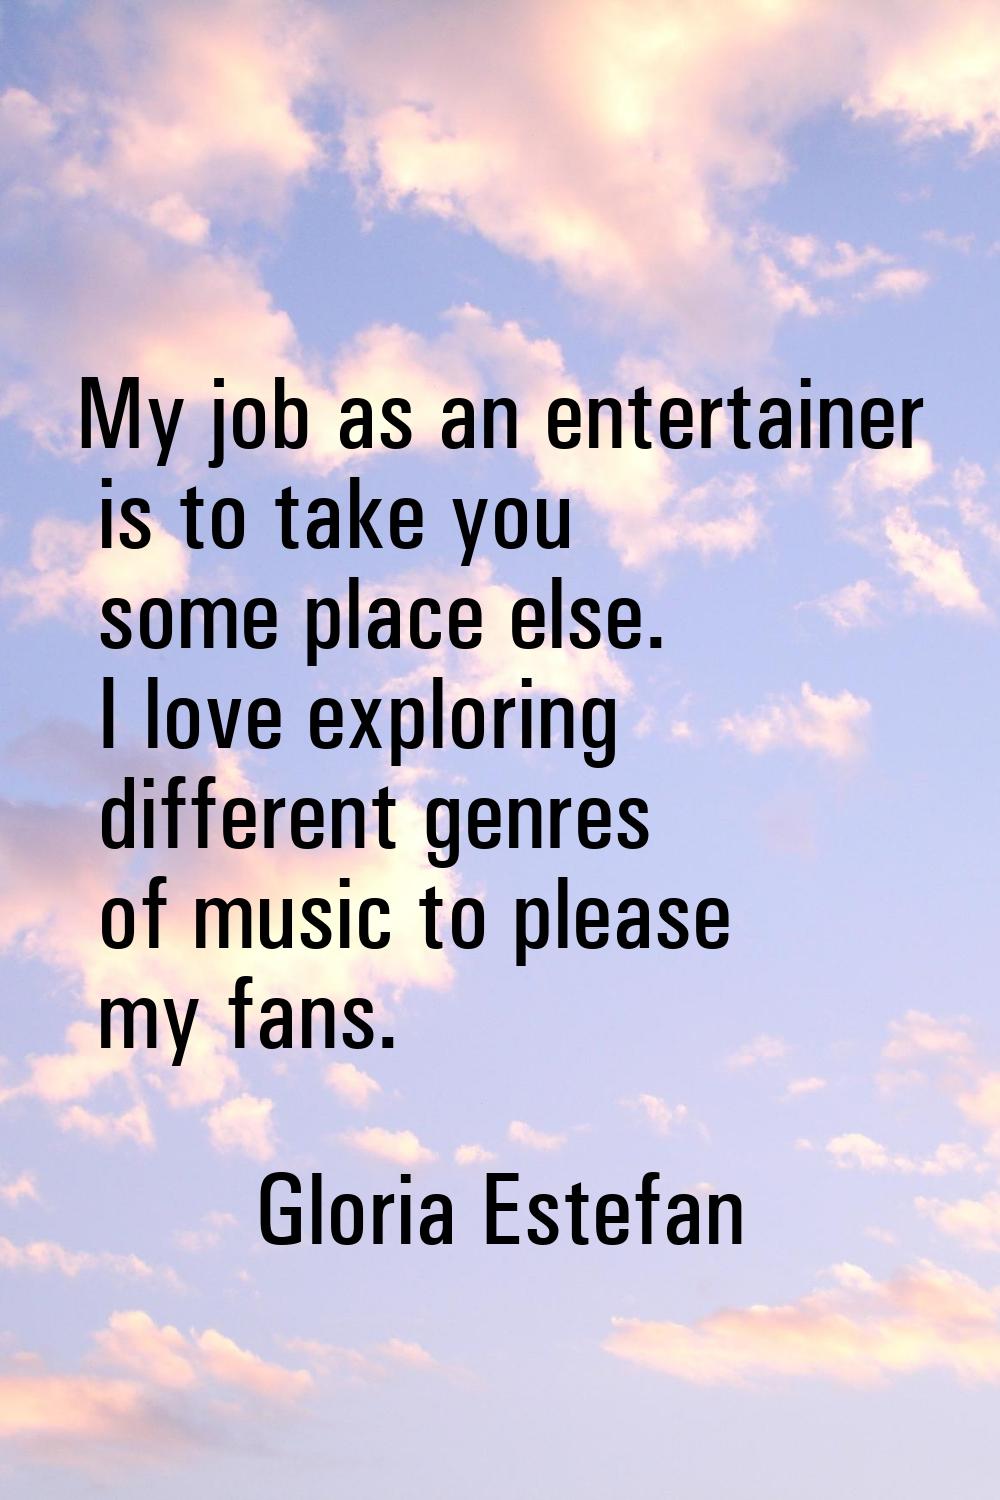 My job as an entertainer is to take you some place else. I love exploring different genres of music